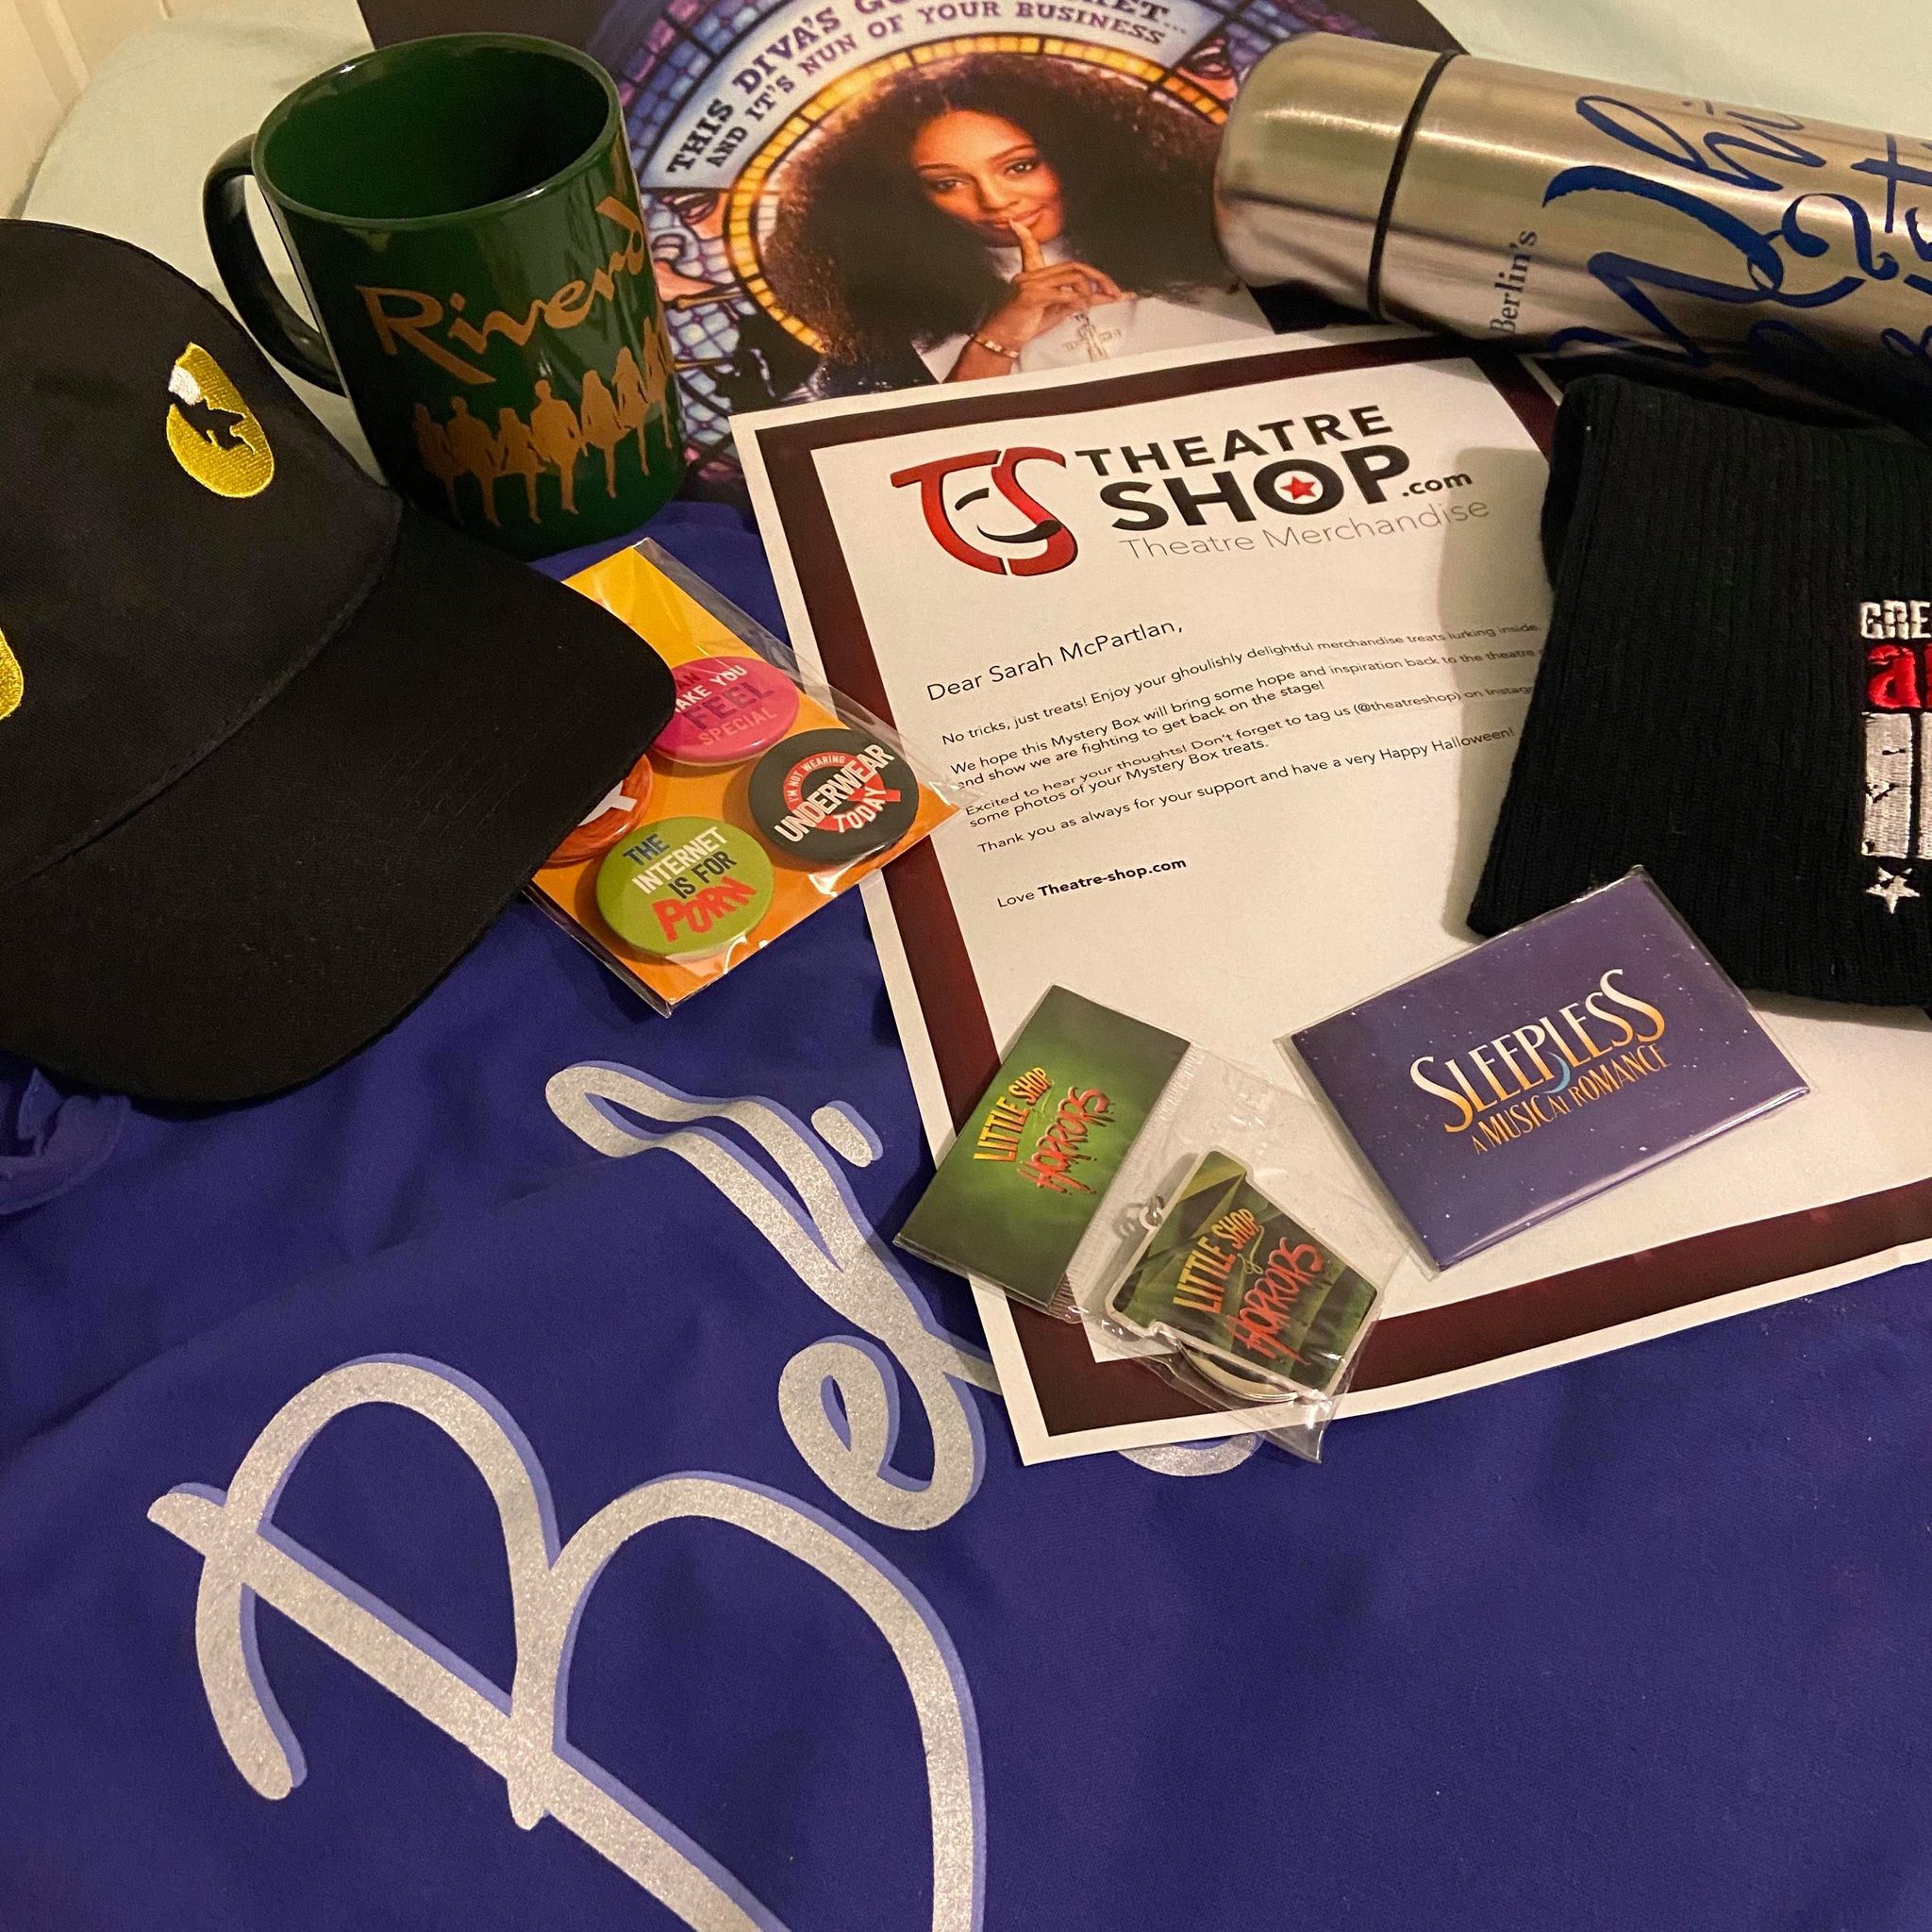 Items from the Thetare Shop Mystery Box